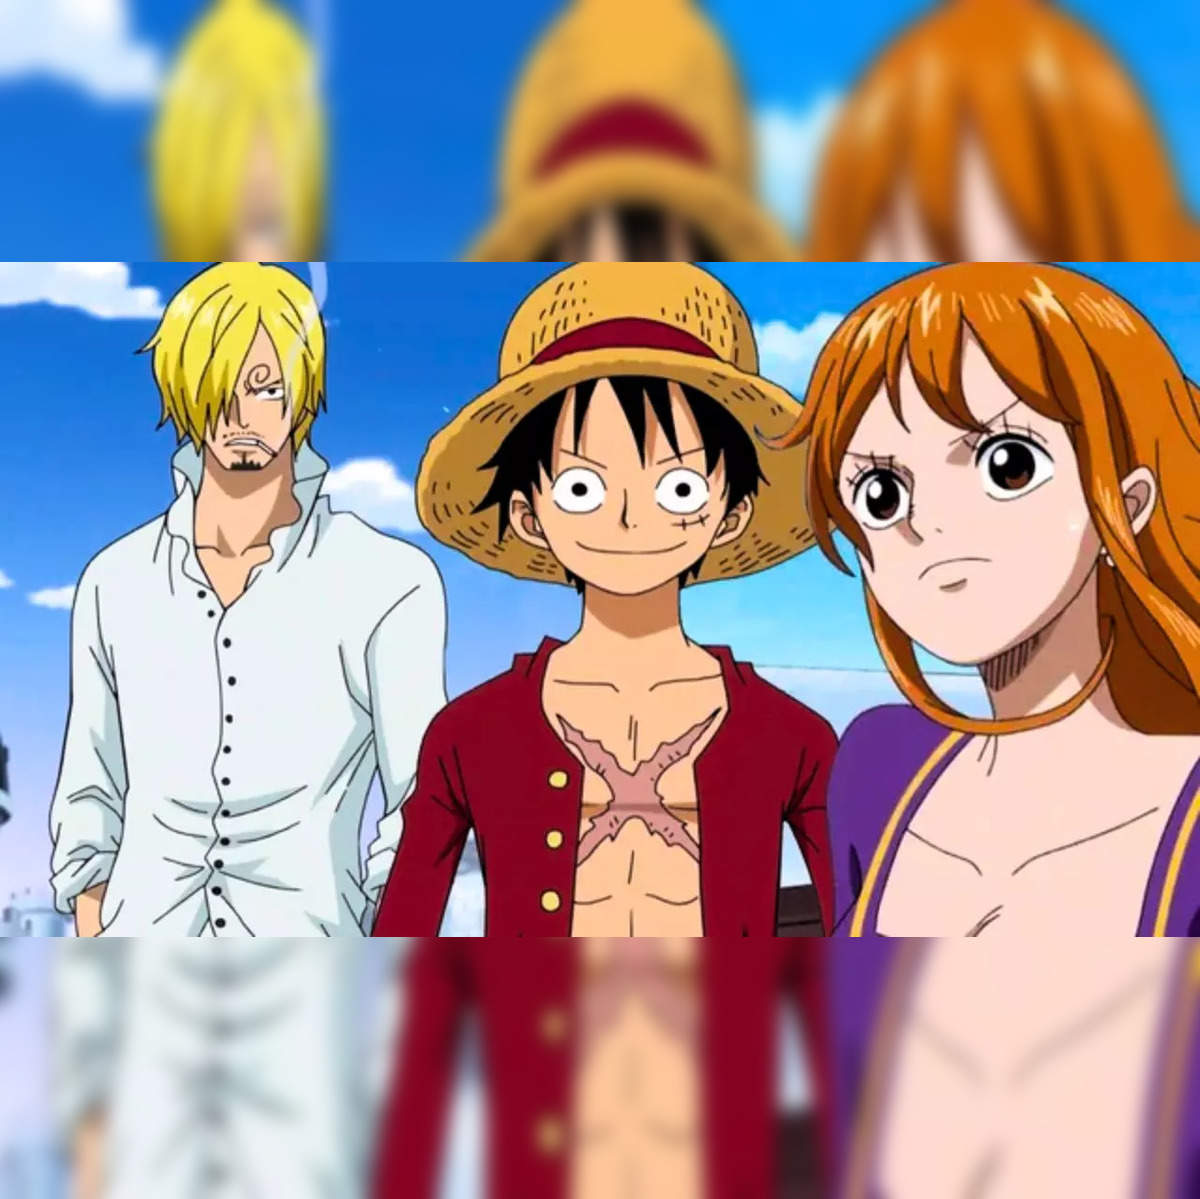 One Piece Top 10 Episodes of Wano Arc